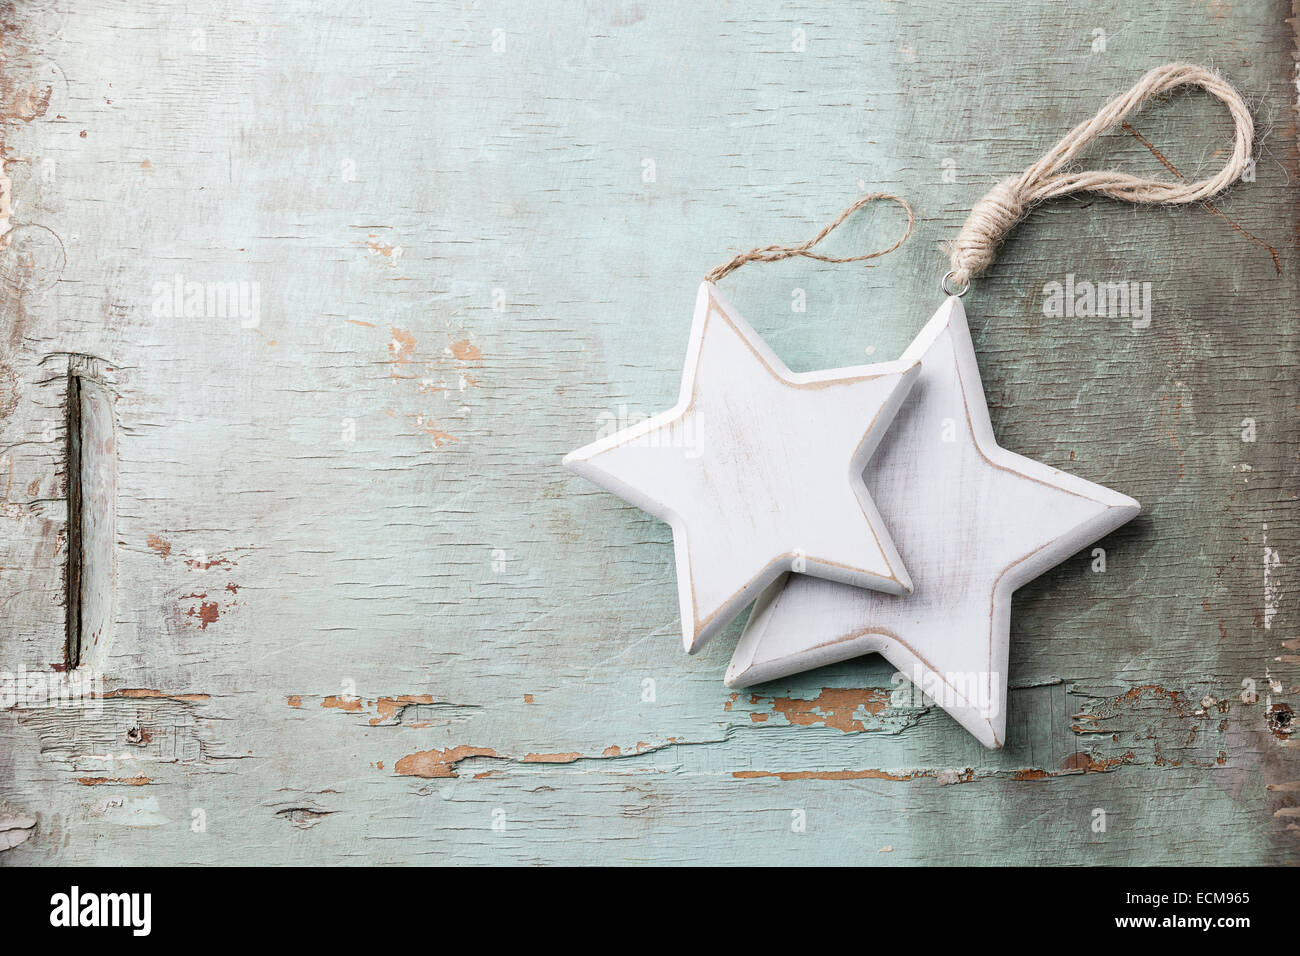 Wooden Christmas decorations stars on blue textured background Stock Photo